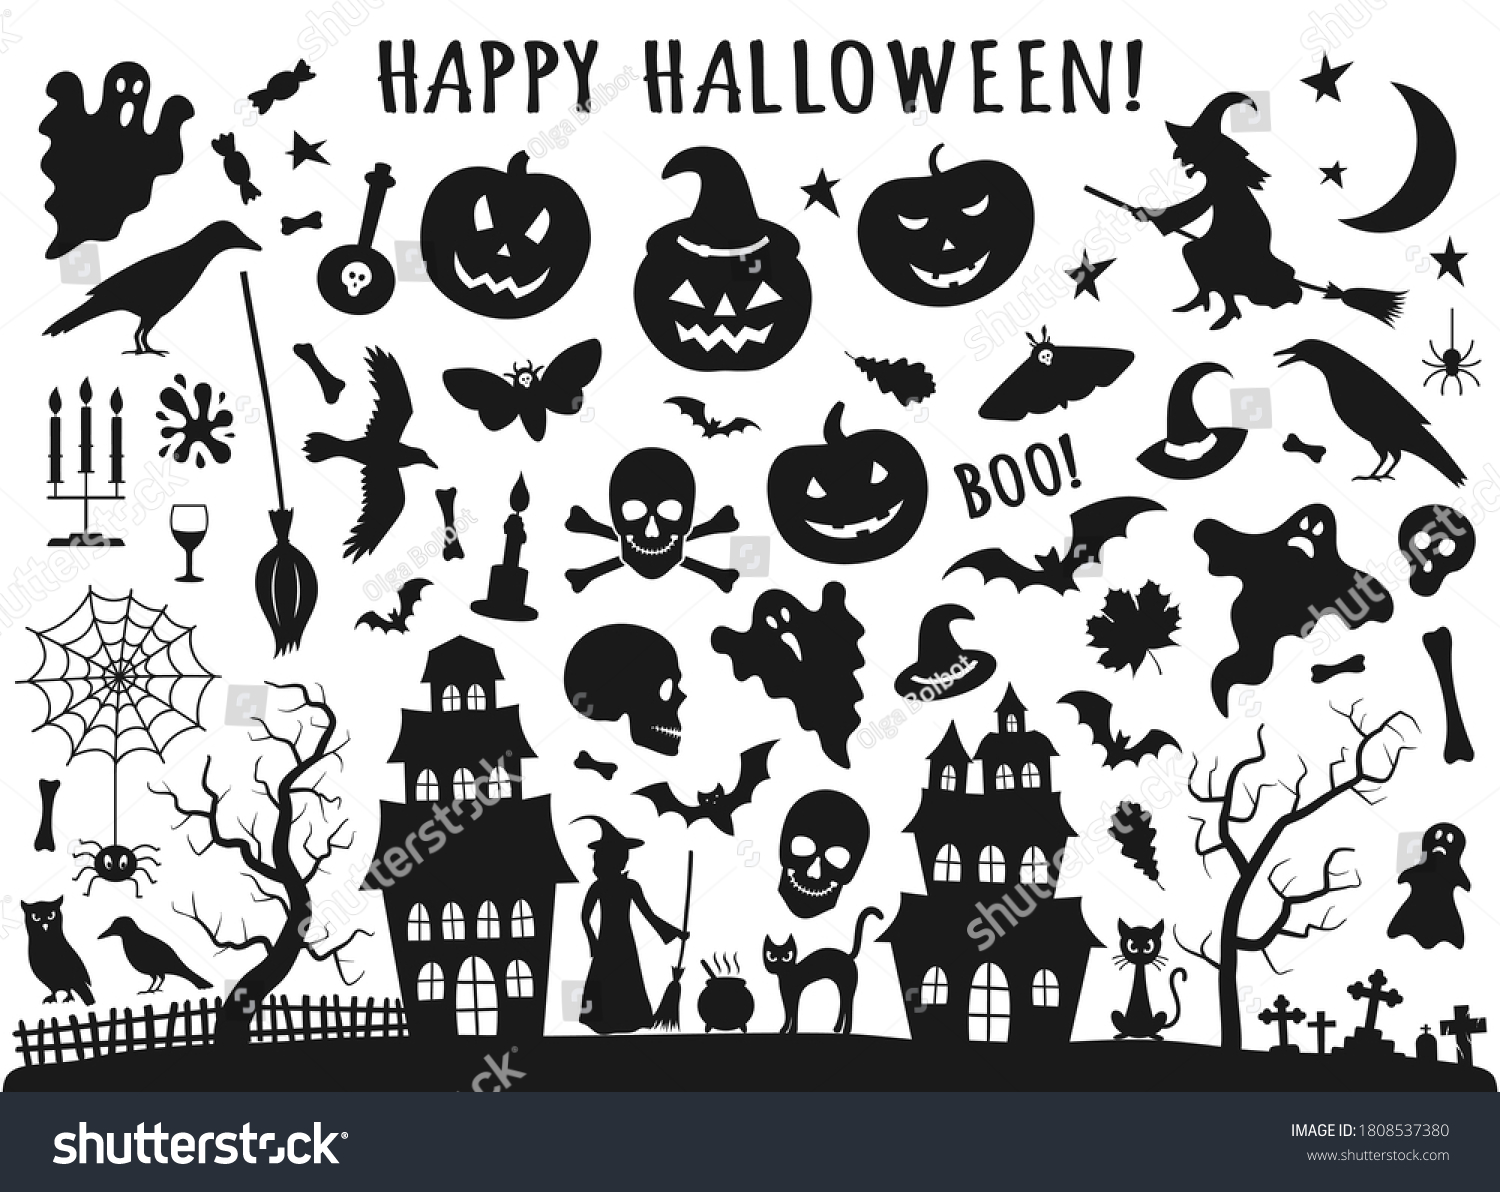 SVG of Set of Halloween black icons. Vector illustration in flat style with witch, cat, raven, hat, ghosts, bats, candle, pumpkin, spider, cobweb, skull and bones svg